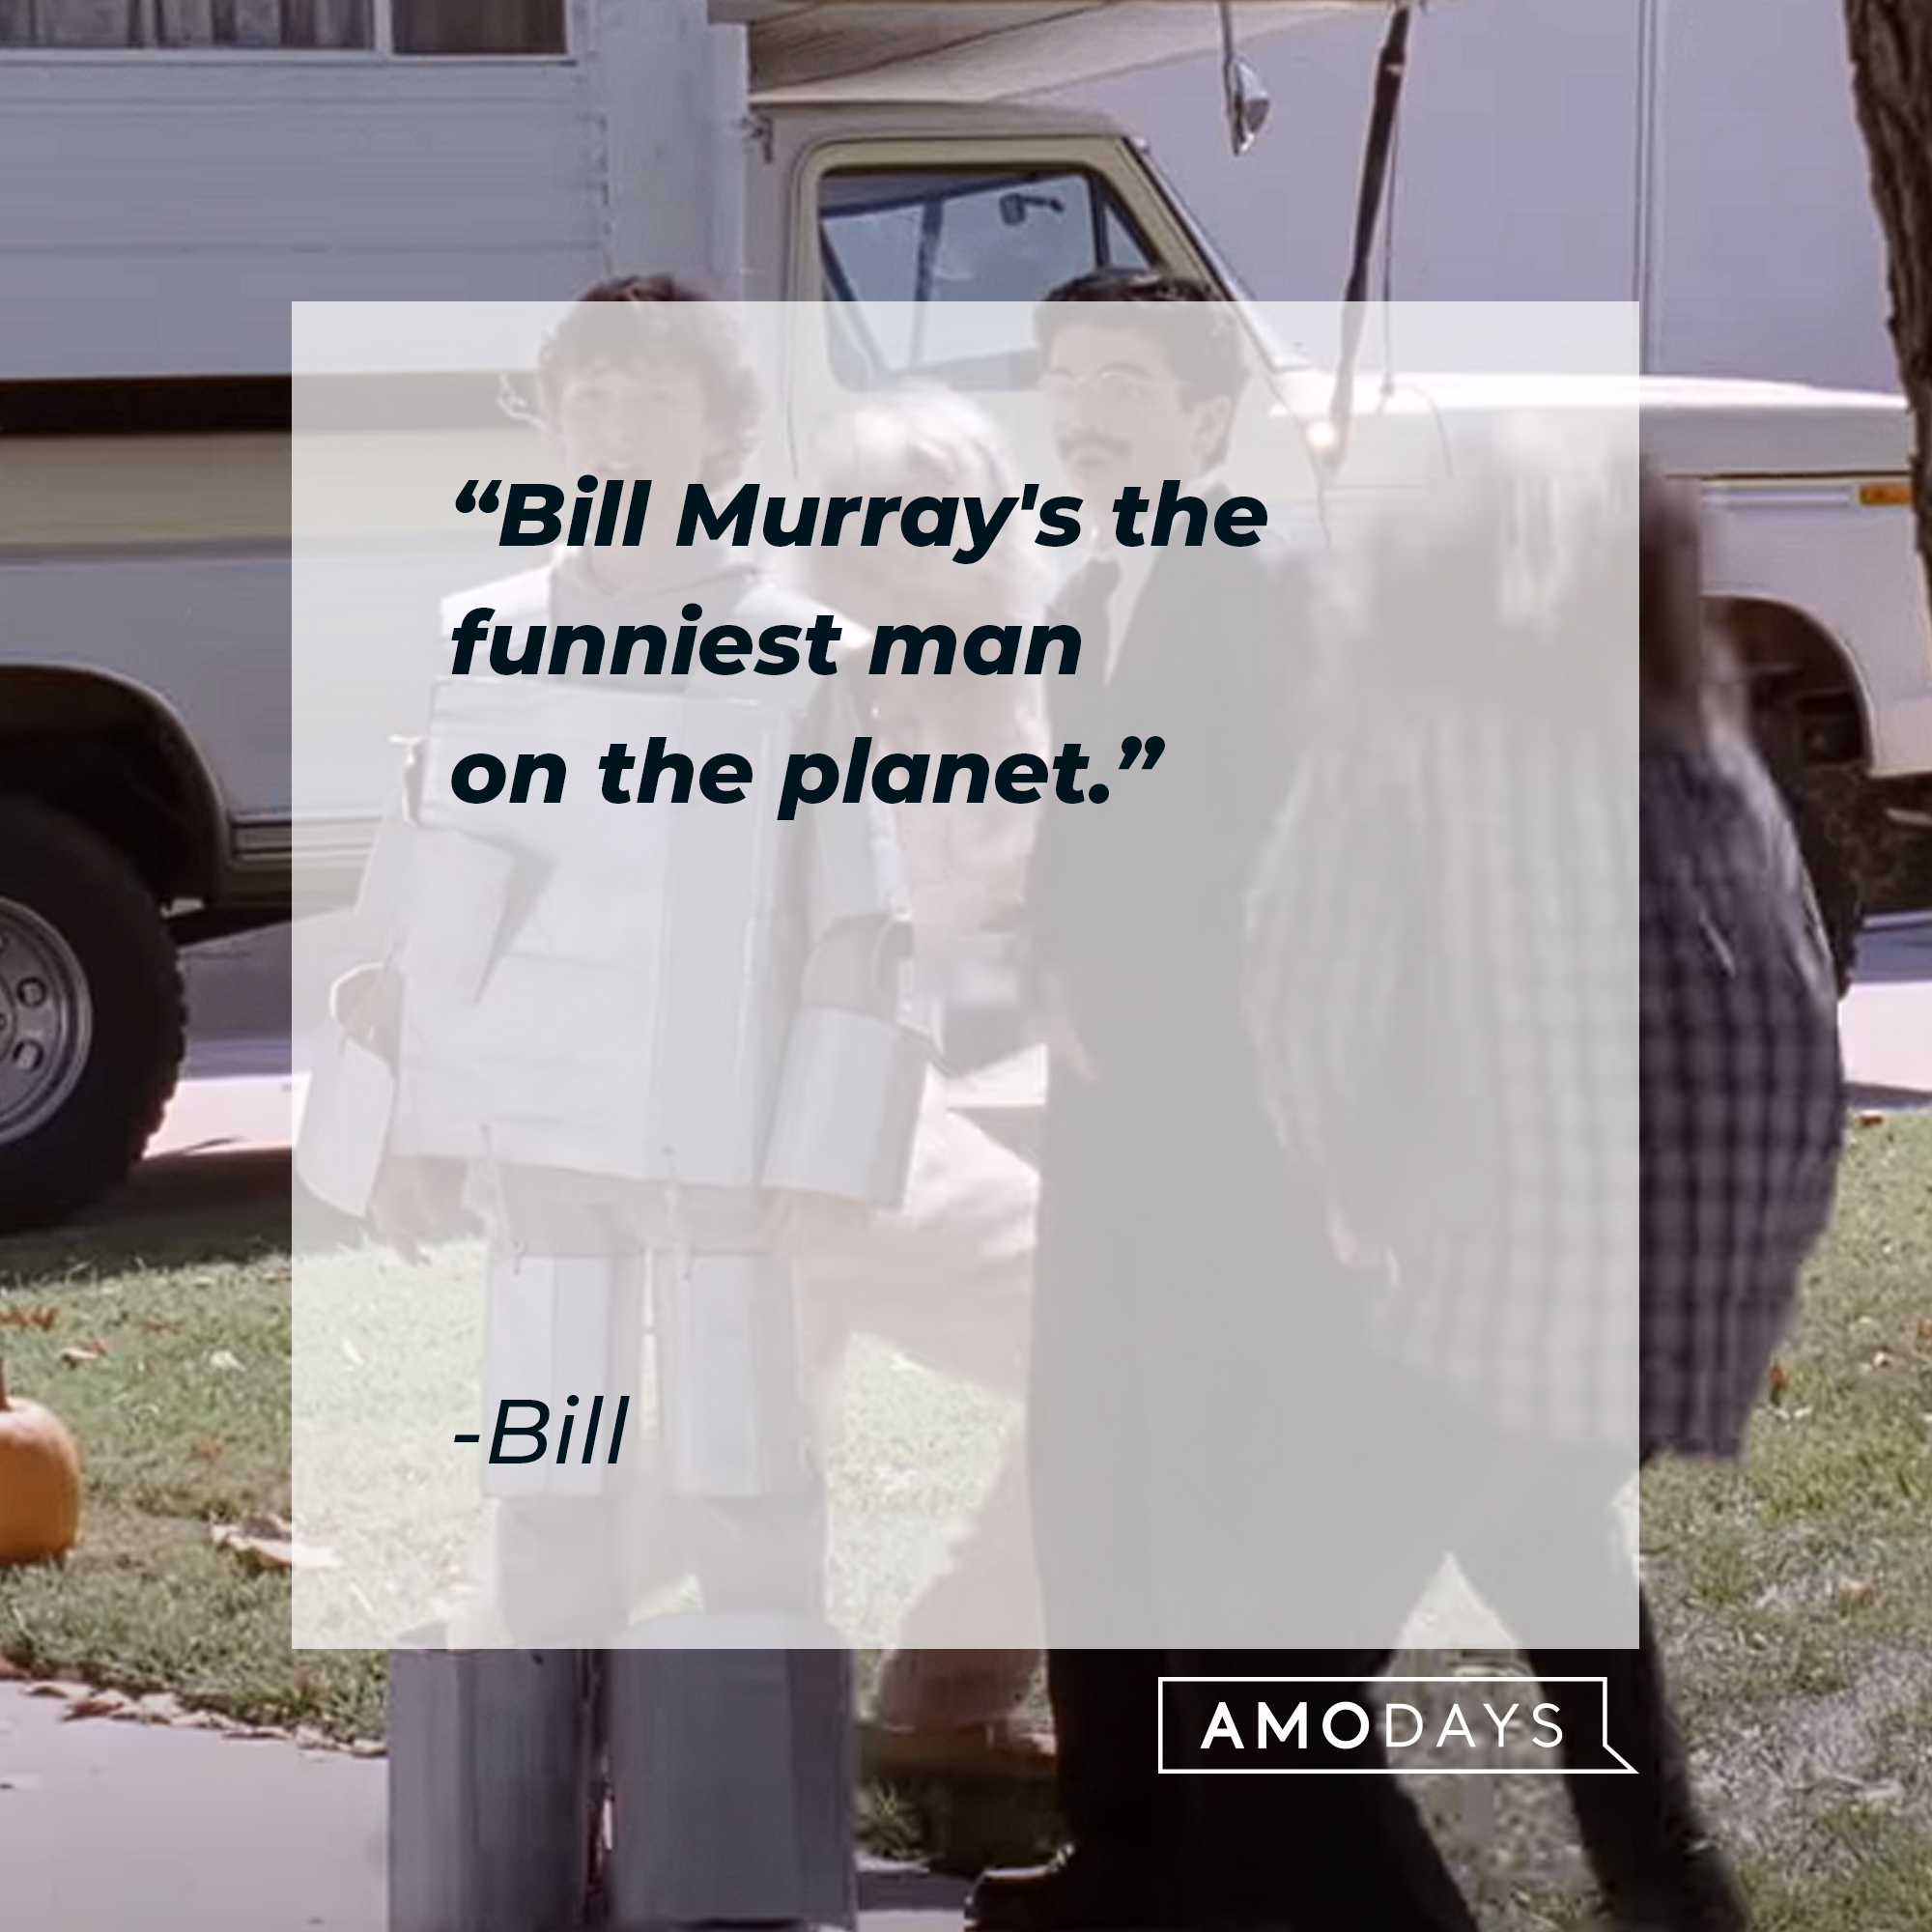 Bill's quote: "Bill Murray's the funniest man on the planet." | Source: Youtube.com/paramountmovies